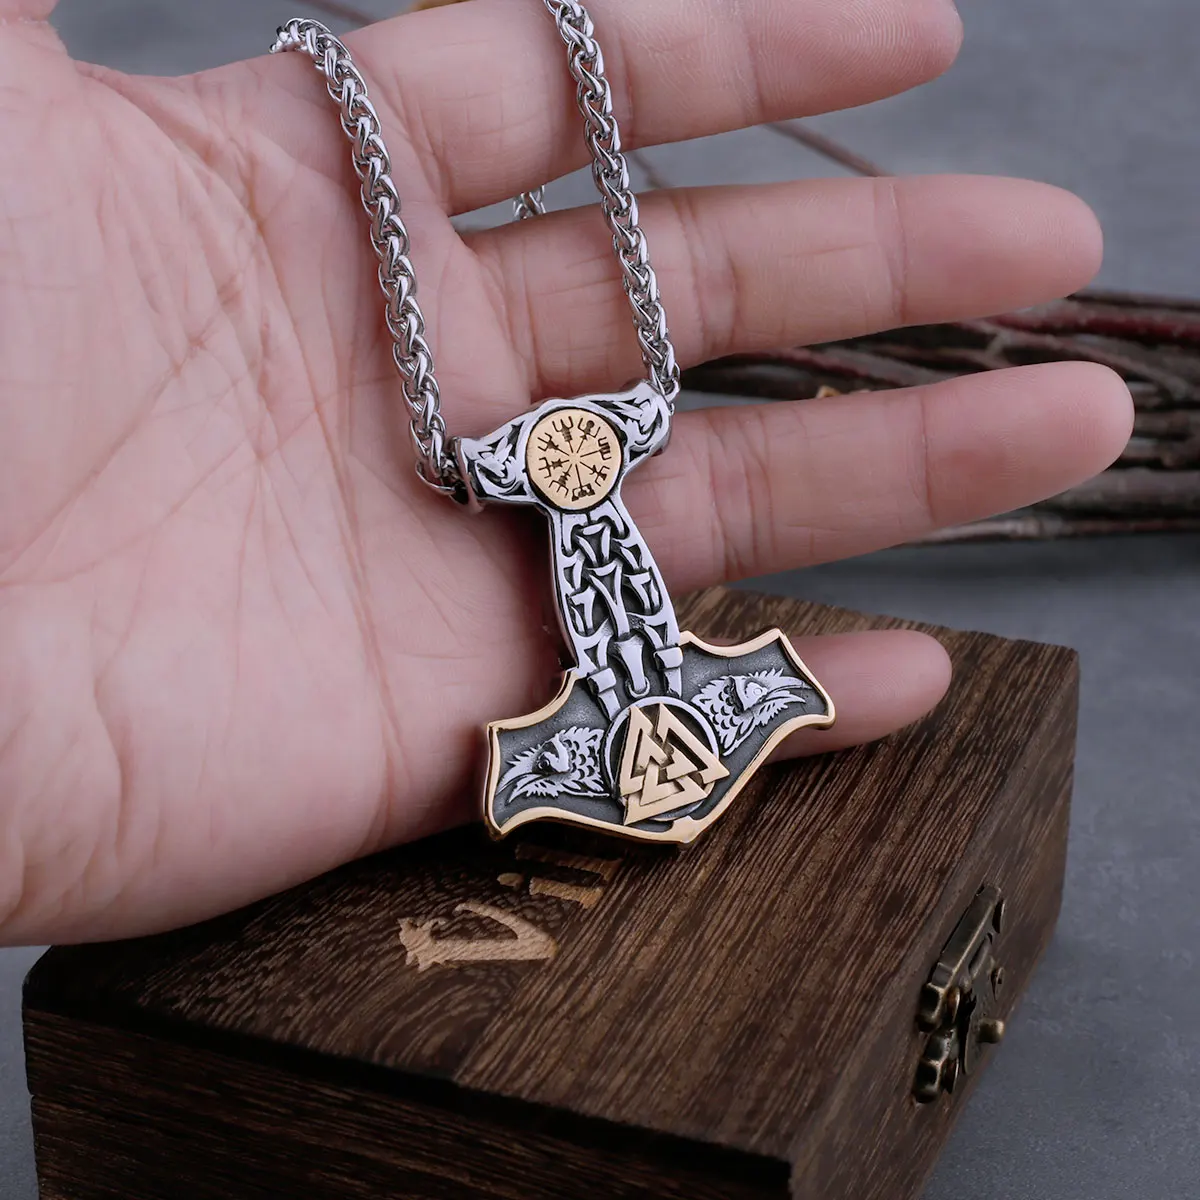 

Viking Thor's Hammer Mjolnir Raven Necklace Men's Road Sign Compass Hip Hop Amulet Stainless Steel Pendant Nordic Jewelry Gift